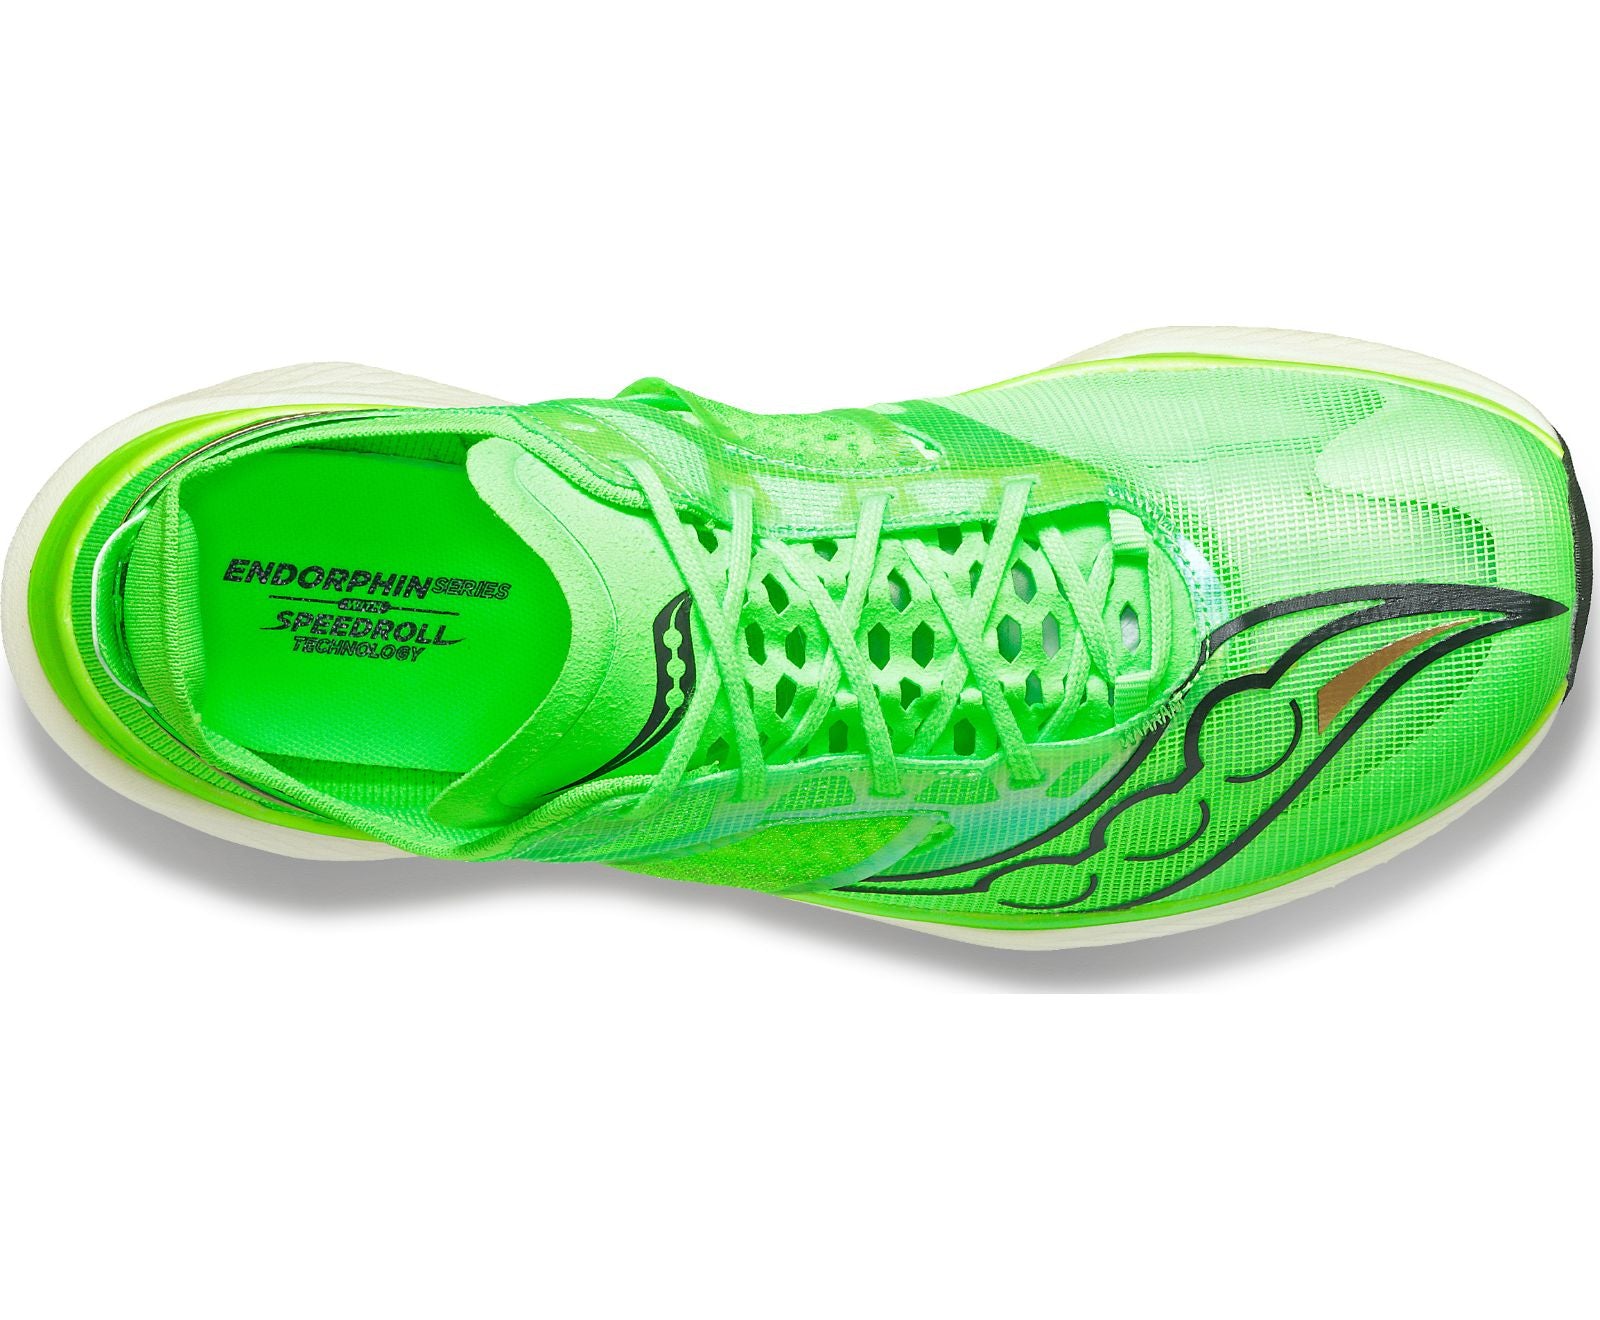 Top view of the Saucony Men's Endorphin Elite in the color Slime